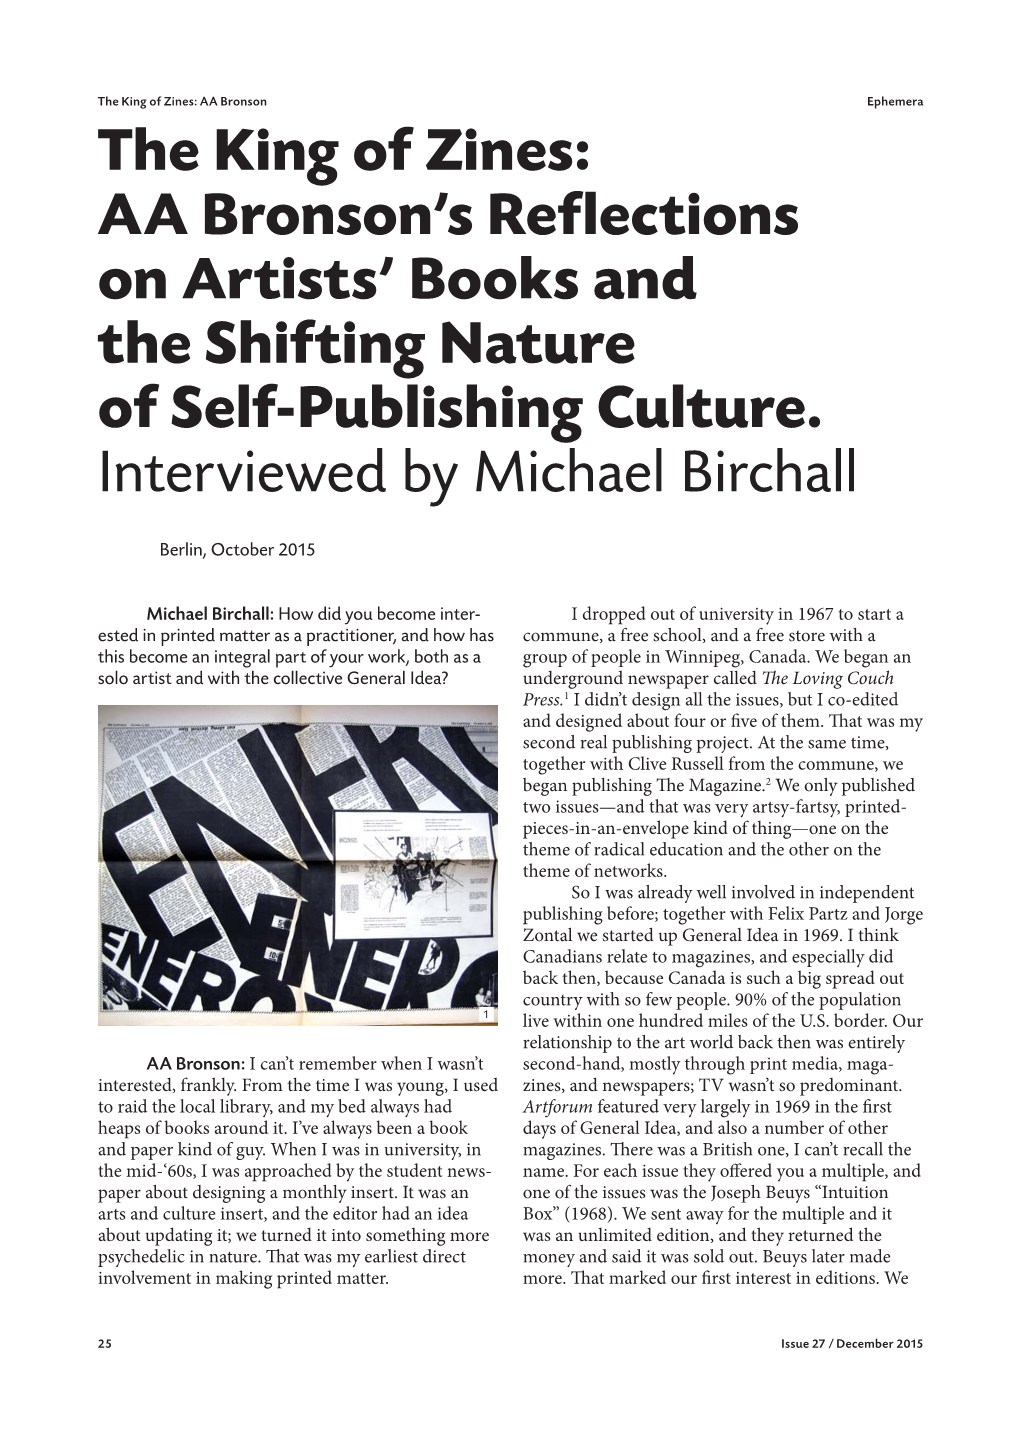 The King of Zines: AA Bronson's Reflections on Artists' Books And